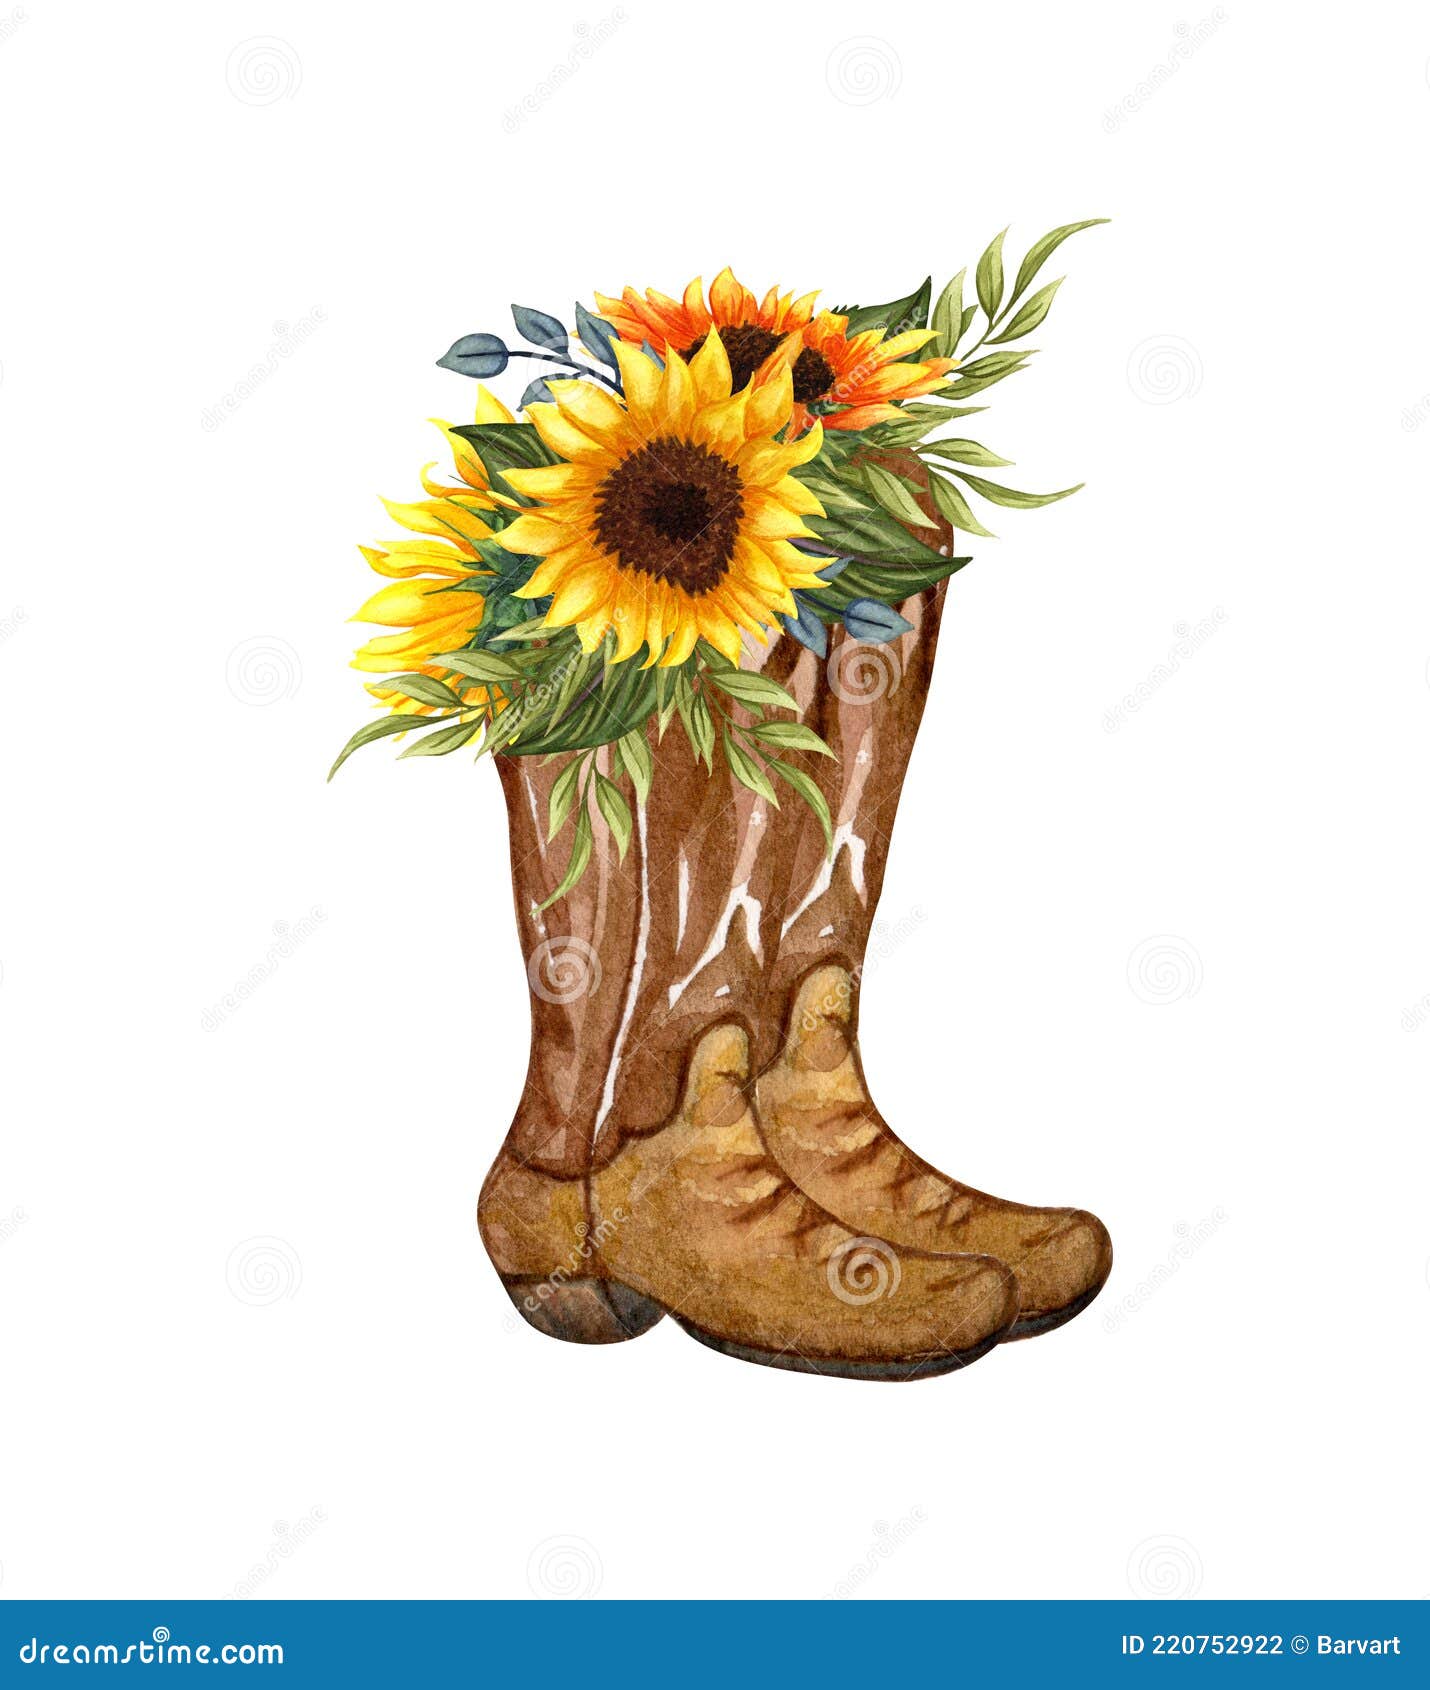 watercolor-flowers-boots-cowboy-boot-sunflowers-farmhouse-rustic-clipart-isolated-white-background-220752922.jpg